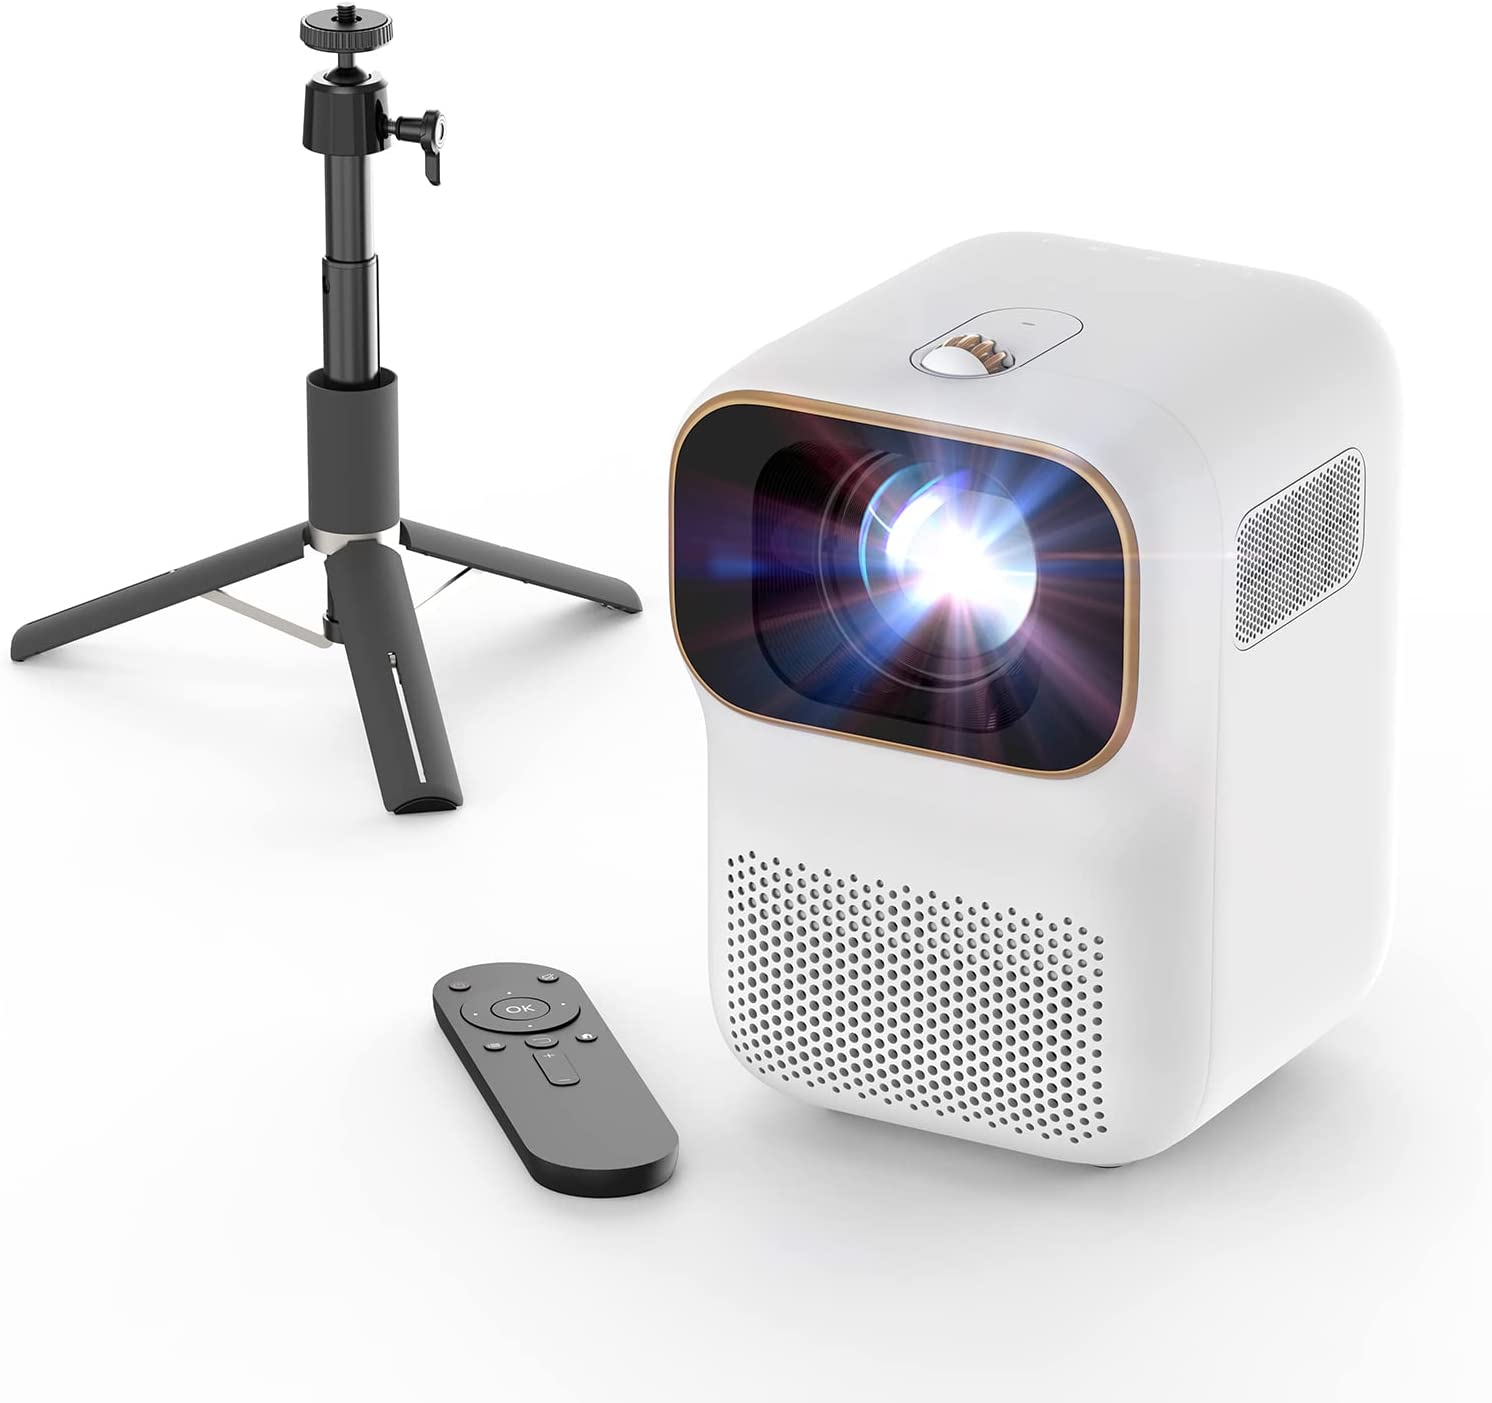 WEWATCH V30SE Native 1080p Mini Portable Outdoor Wi-Fi Projector $55 + Free Shipping